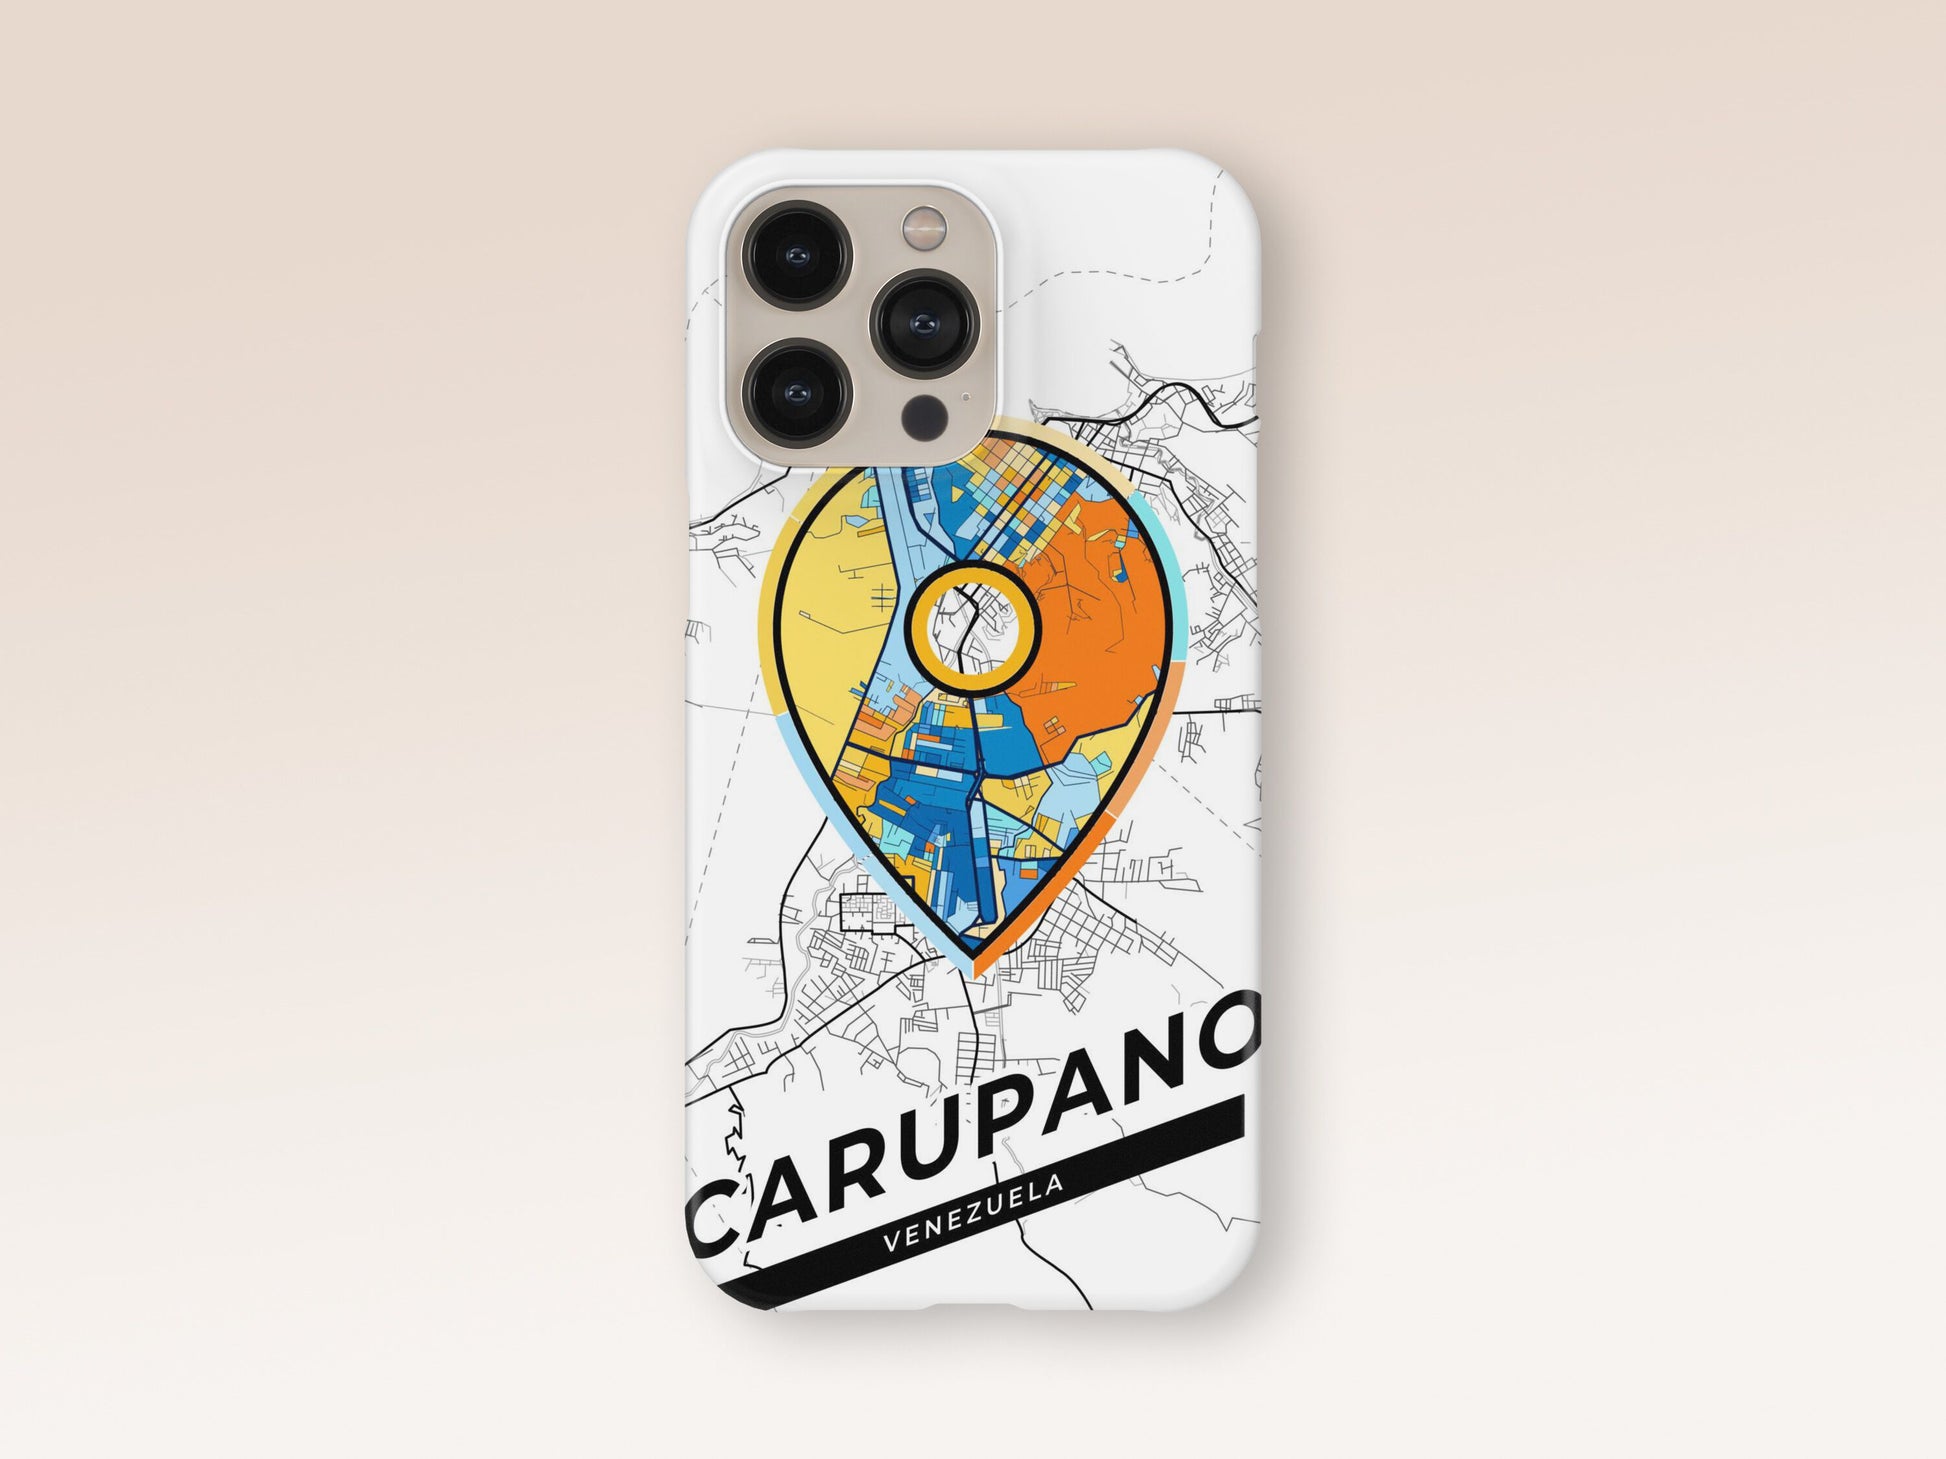 Carupano Venezuela slim phone case with colorful icon. Birthday, wedding or housewarming gift. Couple match cases. 1